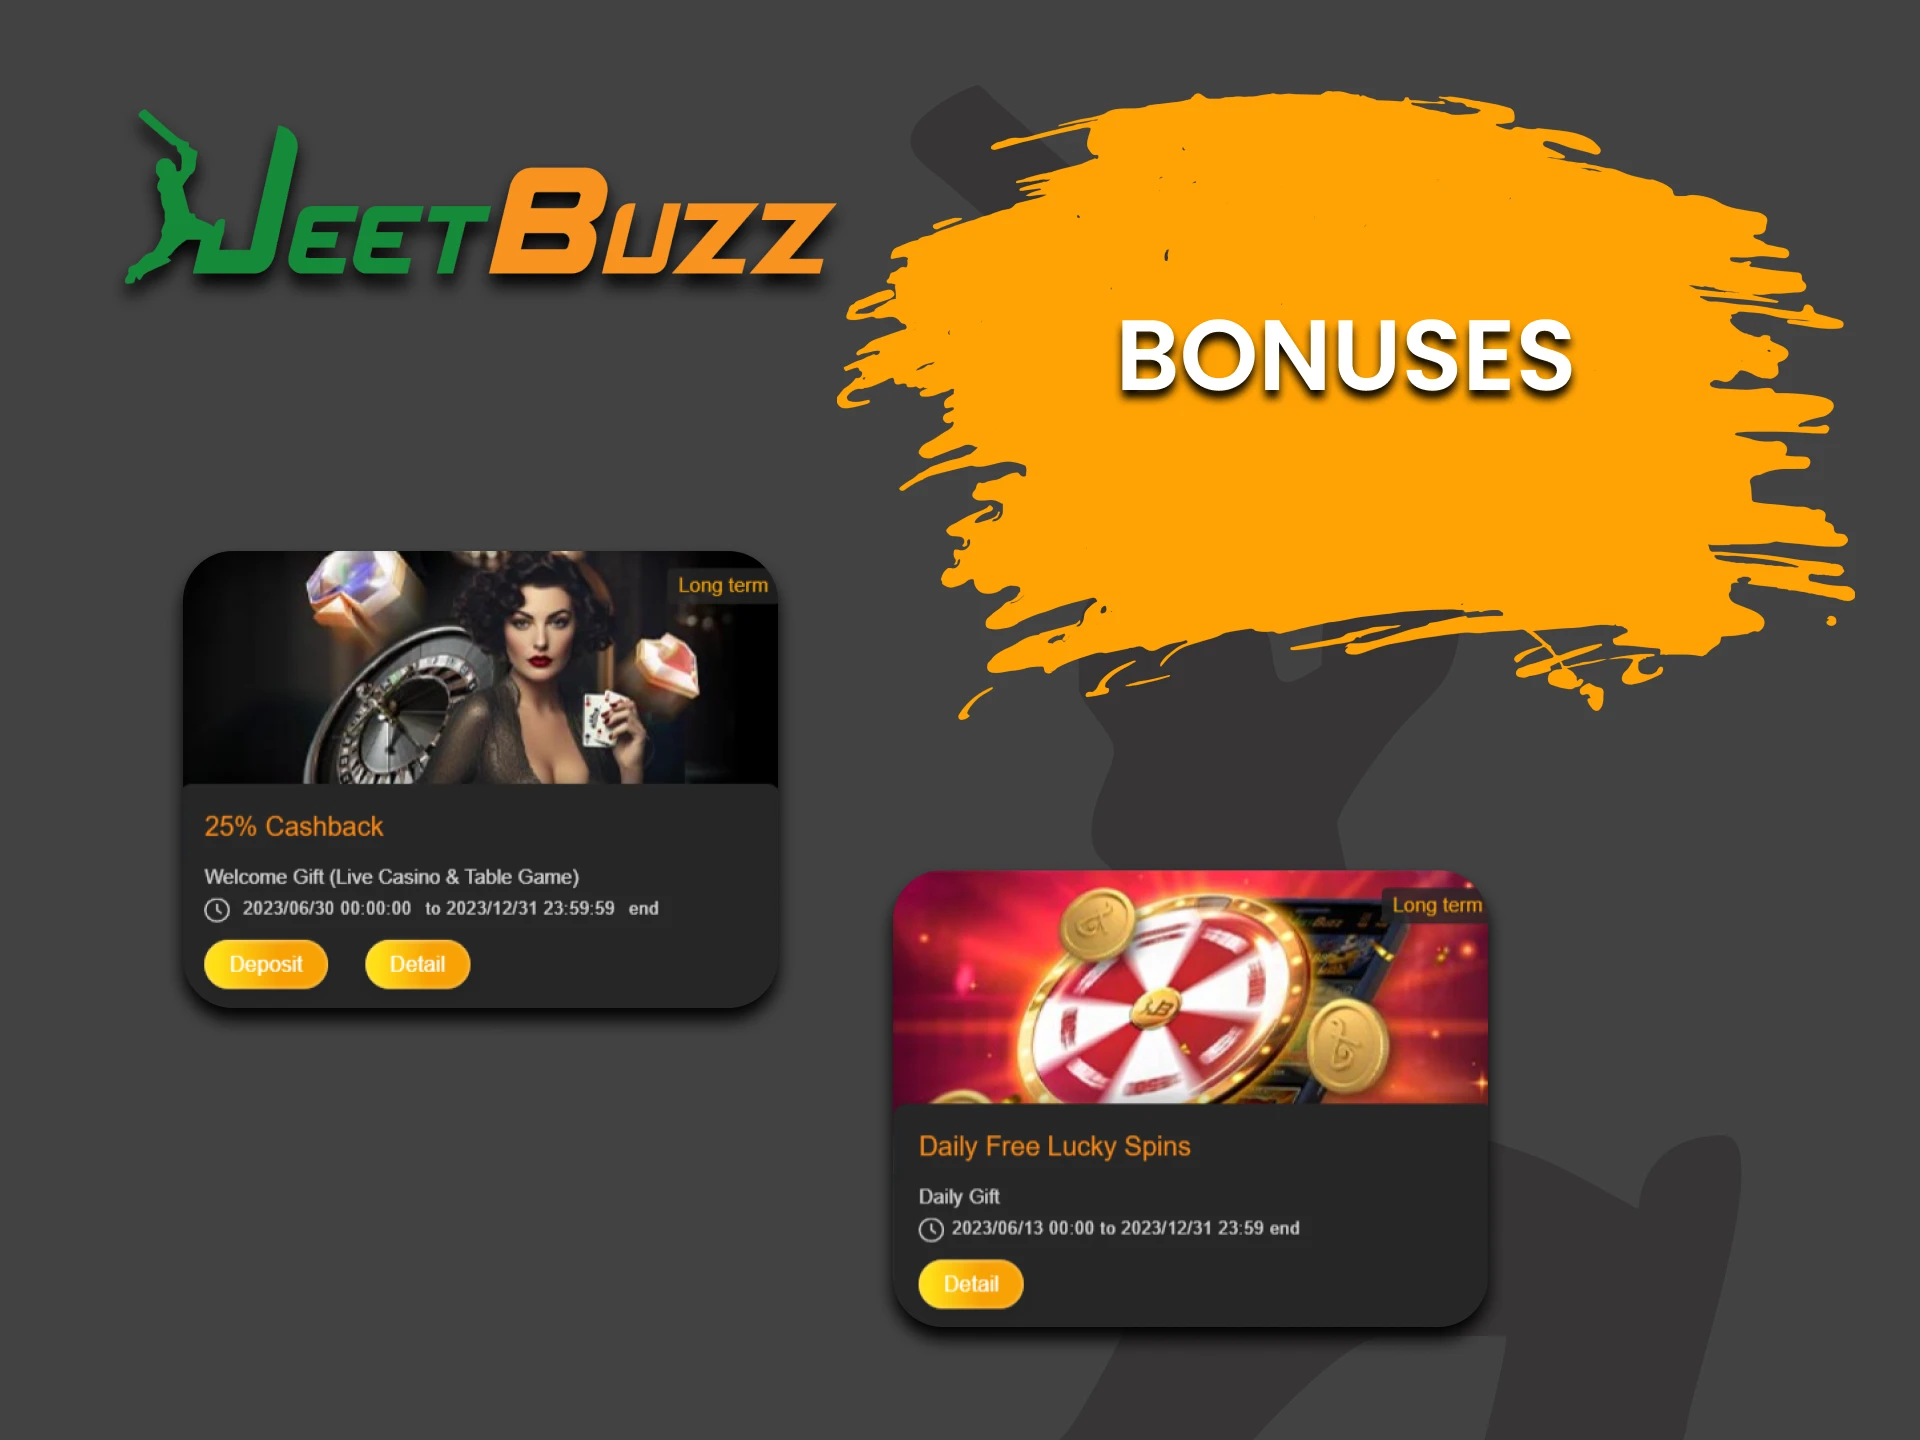 Jeetbuzz is giving bonuses to Sic Bo players.